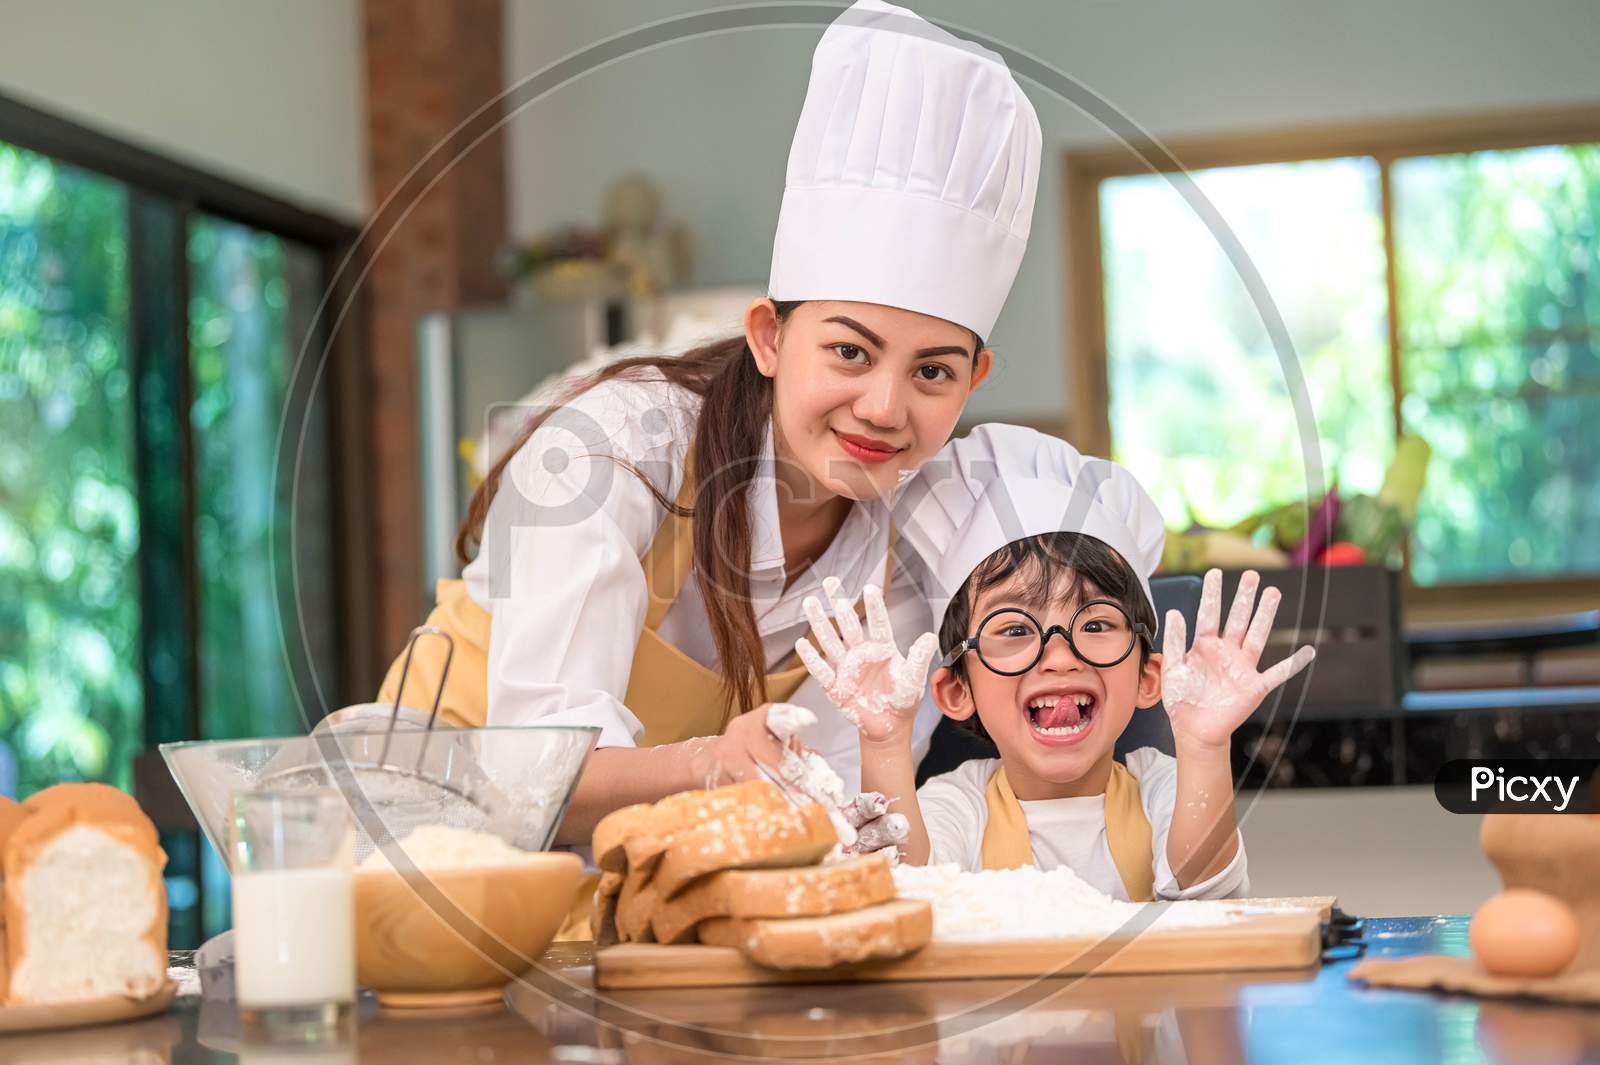 Beautiful Woman And Cute Little Asian Boy With Eyeglasses, Chef Hat And Apron Playing And Baking Bakery In Home Kitchen Funny Concept. Homemade Food And Bread. Funny Face Emotion Looking Camera